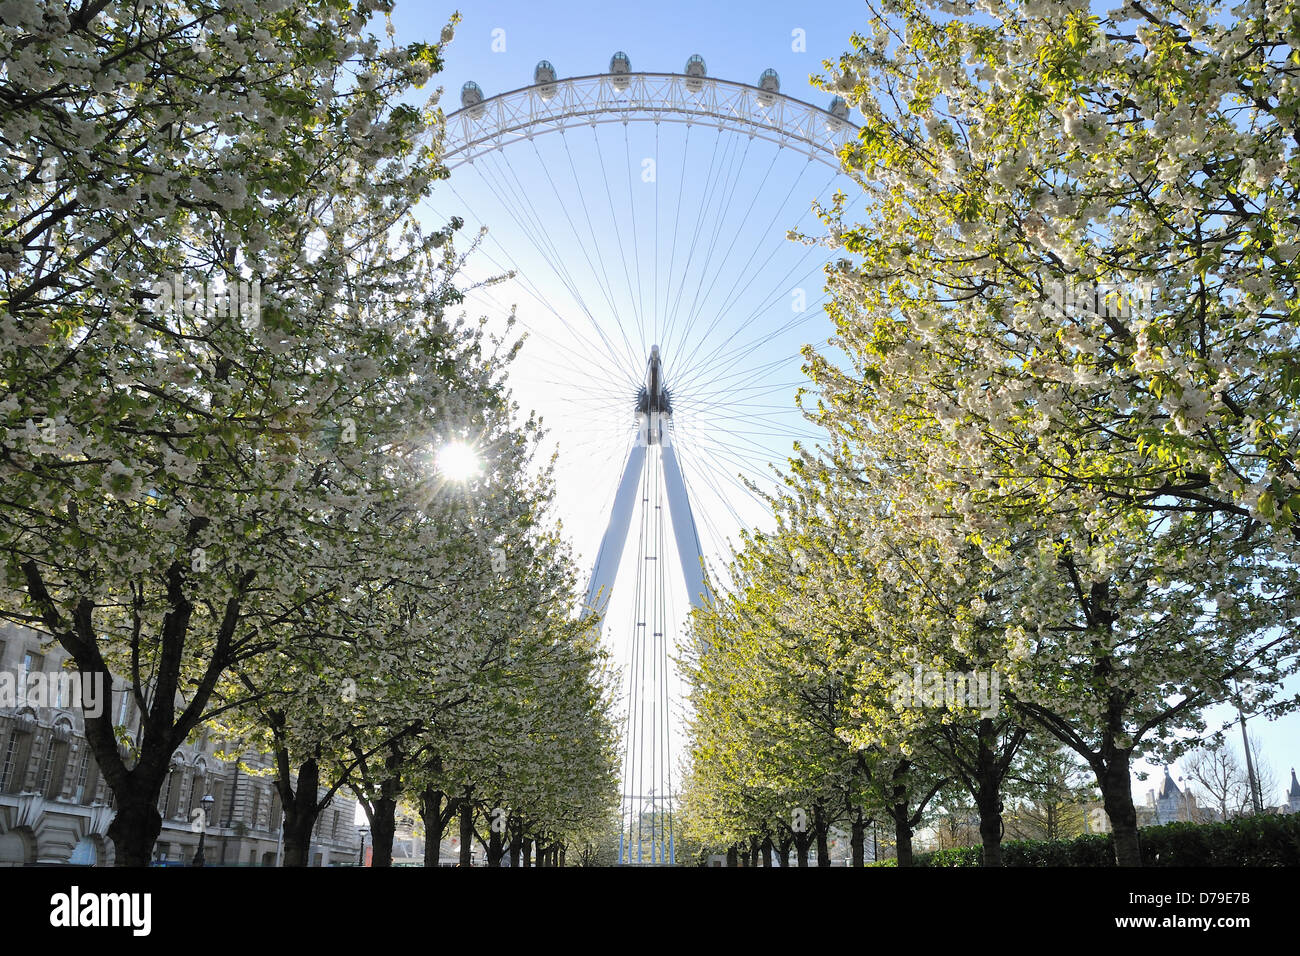 London Eye in spring, with sunlight and blossom on trees in foreground Stock Photo